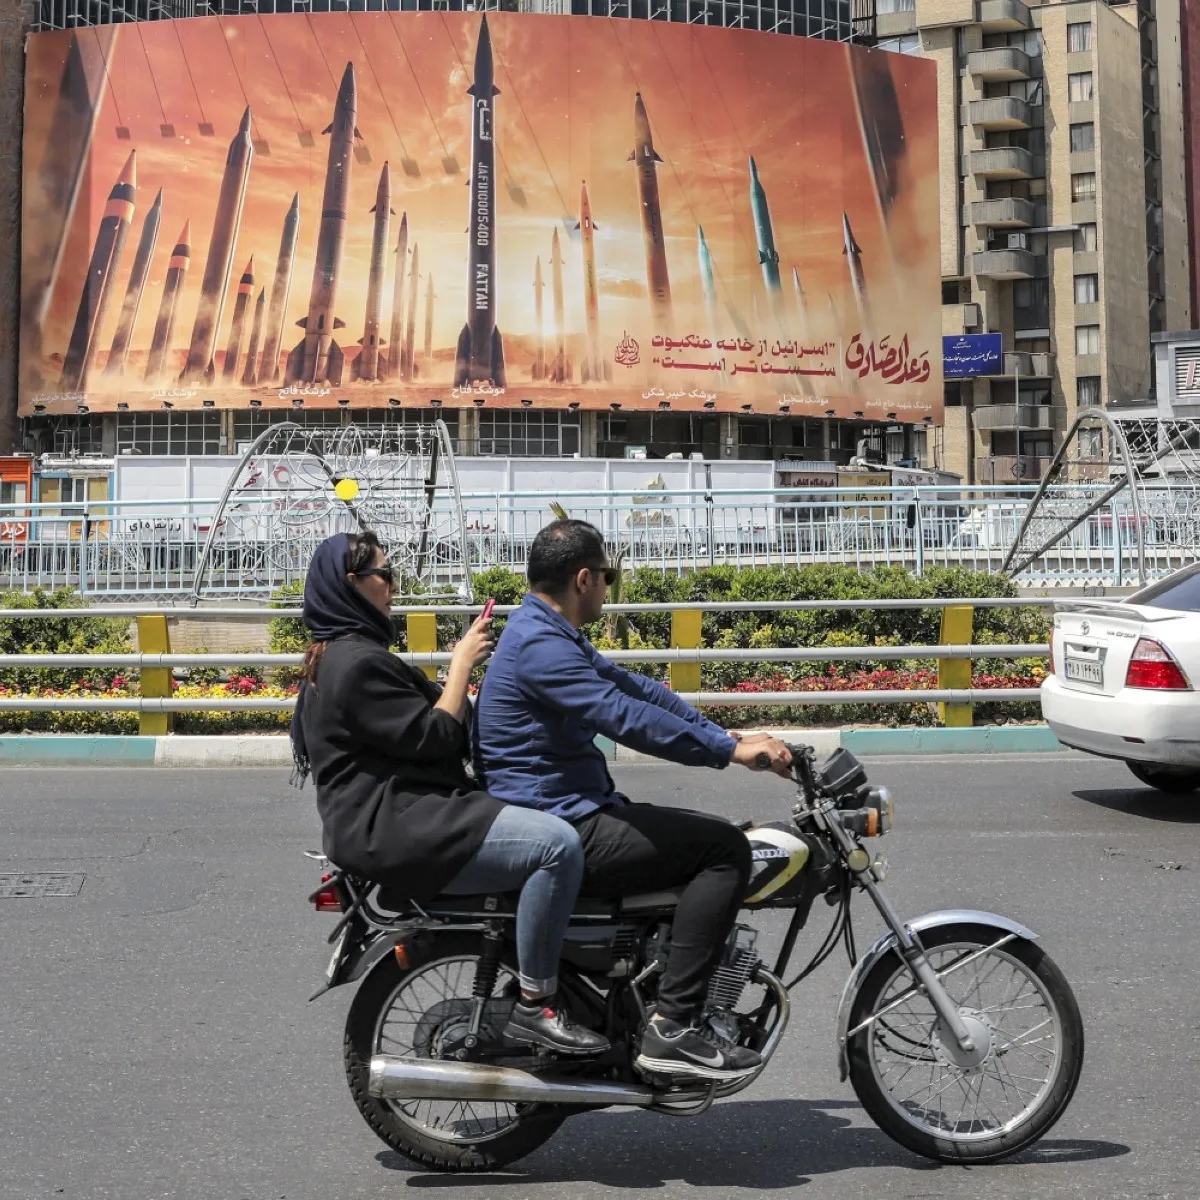 TEHRAN: A woman uses a phone while riding behind a man on a motorcycle moving past a billboard depicting named Iranian ballistic missiles in service, with text in Arabic reading ‘the honest [person’s] promise’ and in Persian ‘Zionist entity is weaker than a spider’s web’, in Valiasr Square in central Tehran on April 15, 2024. – AFP